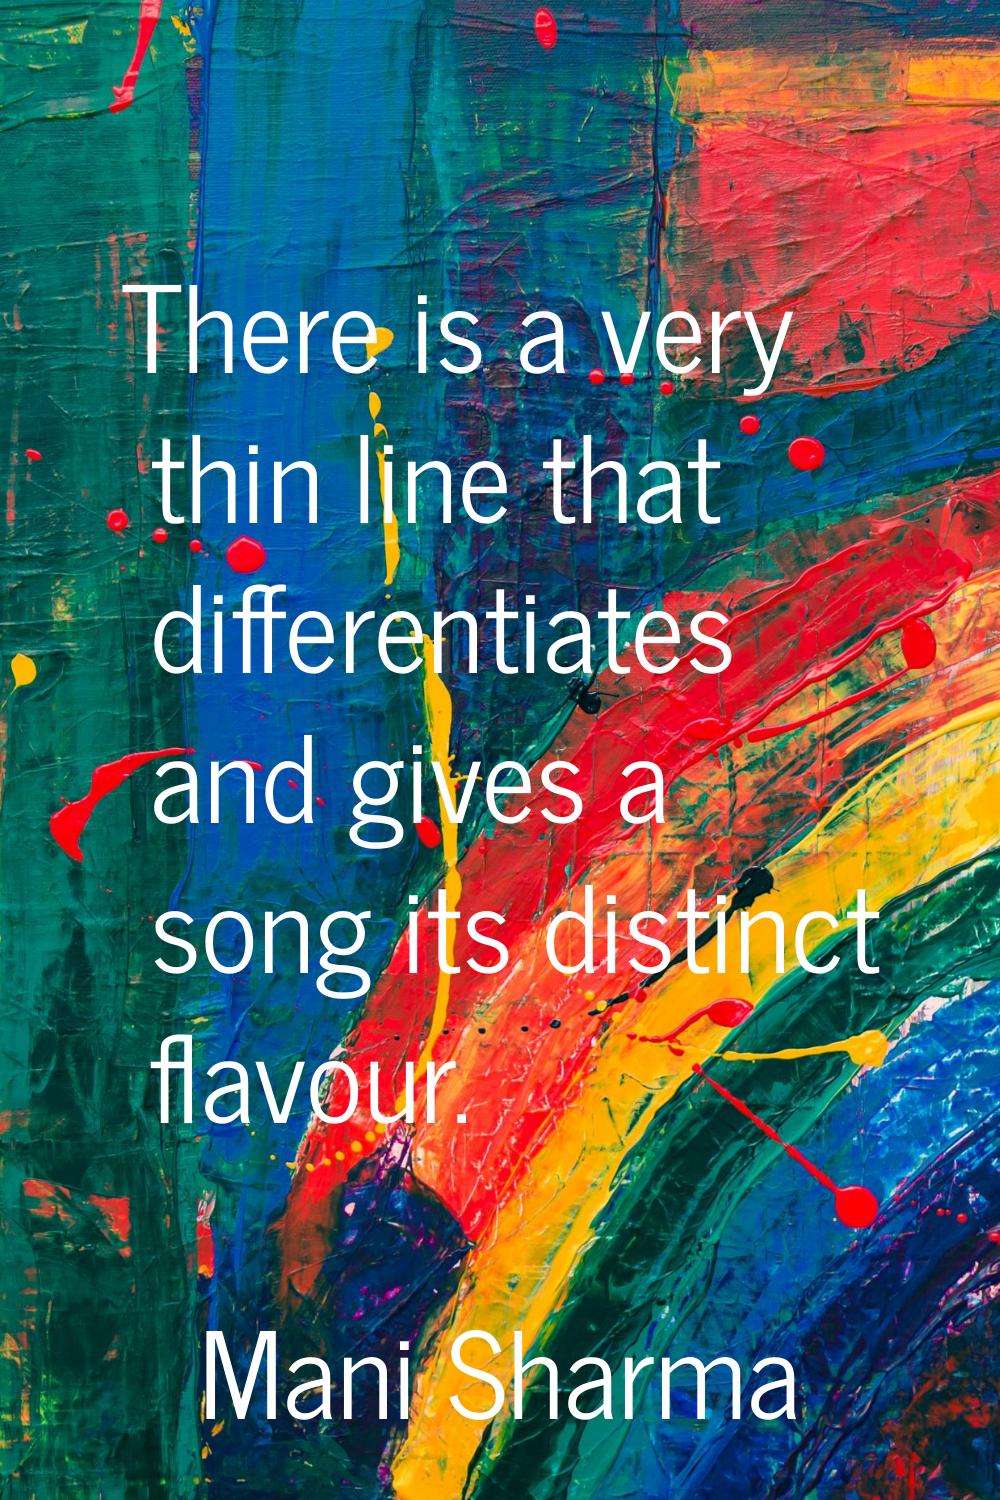 There is a very thin line that differentiates and gives a song its distinct flavour.